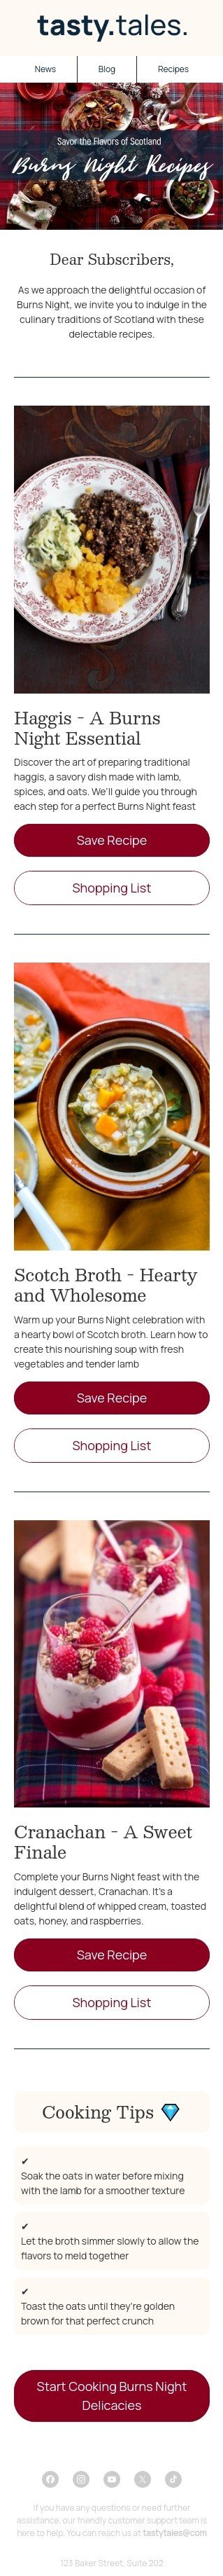 Burns Night email template "Burns Night recipes" for food industry mobile view